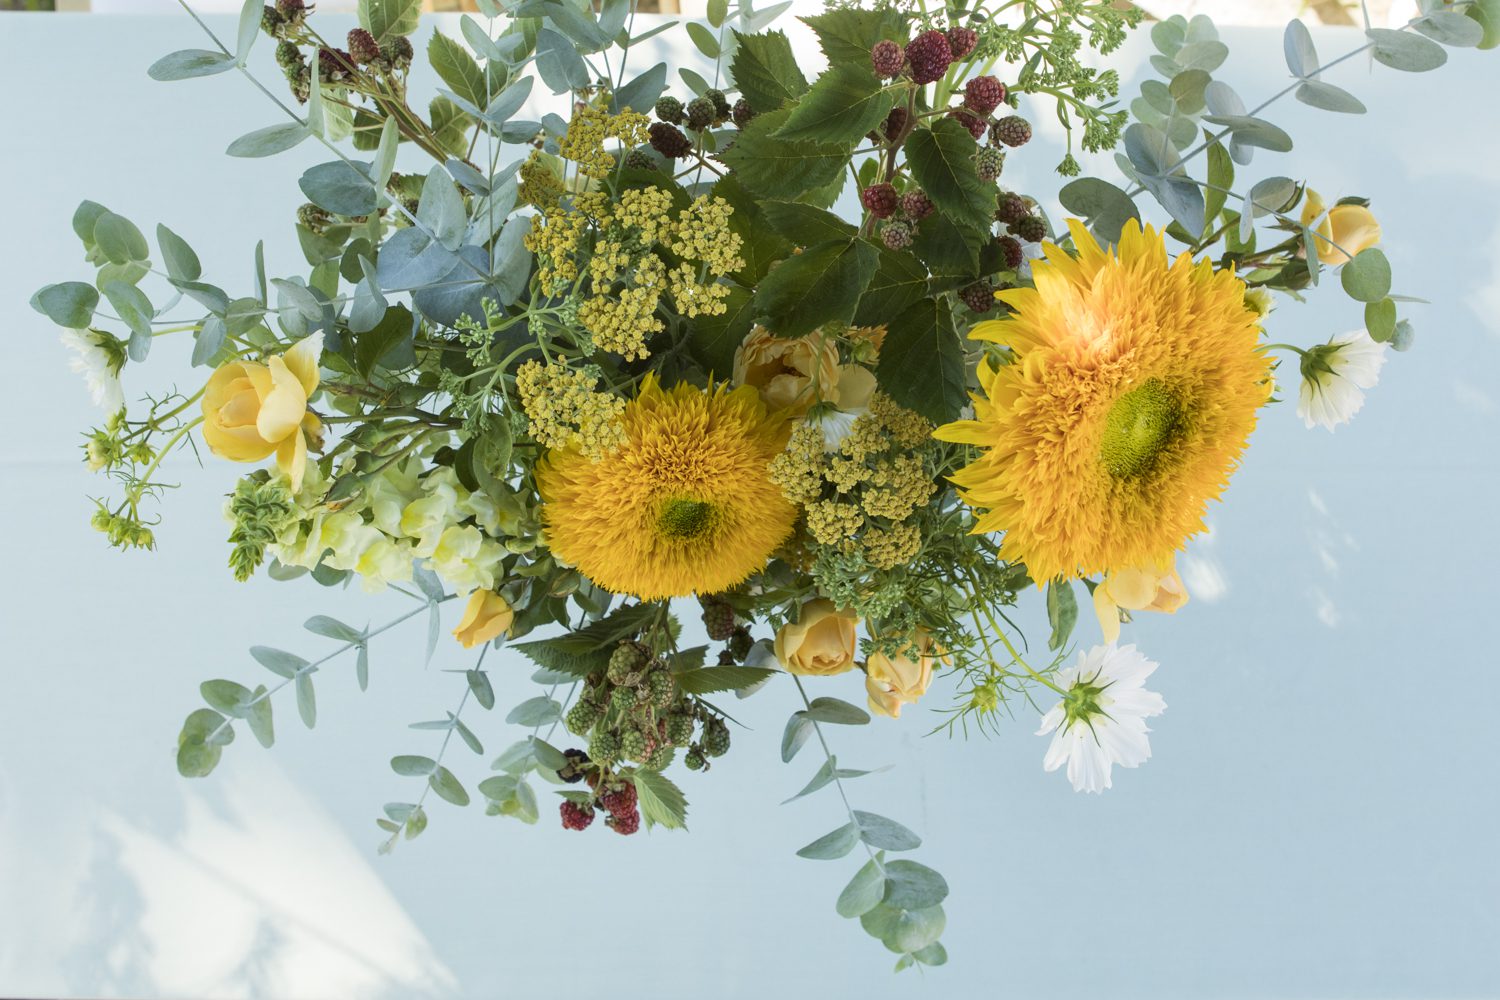 A bouquet of sunflowers and greenery on a table.